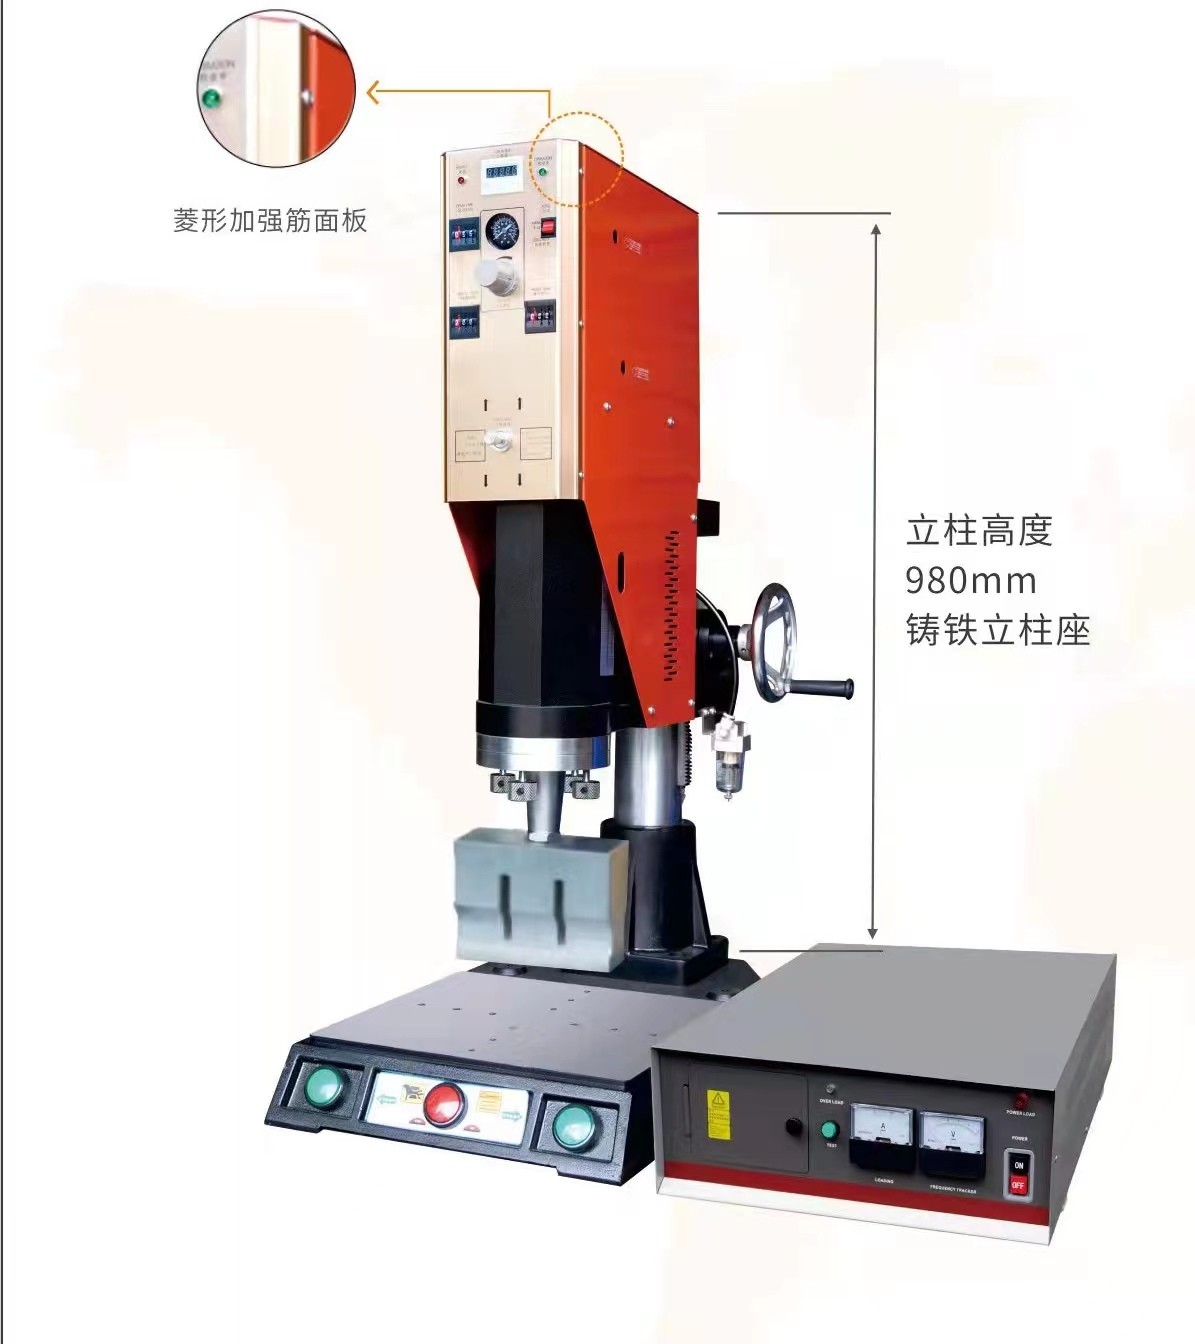 20Khz Ultrasonic Stable Output Welding Machine with Modular Design Complies with CE Safety Standards